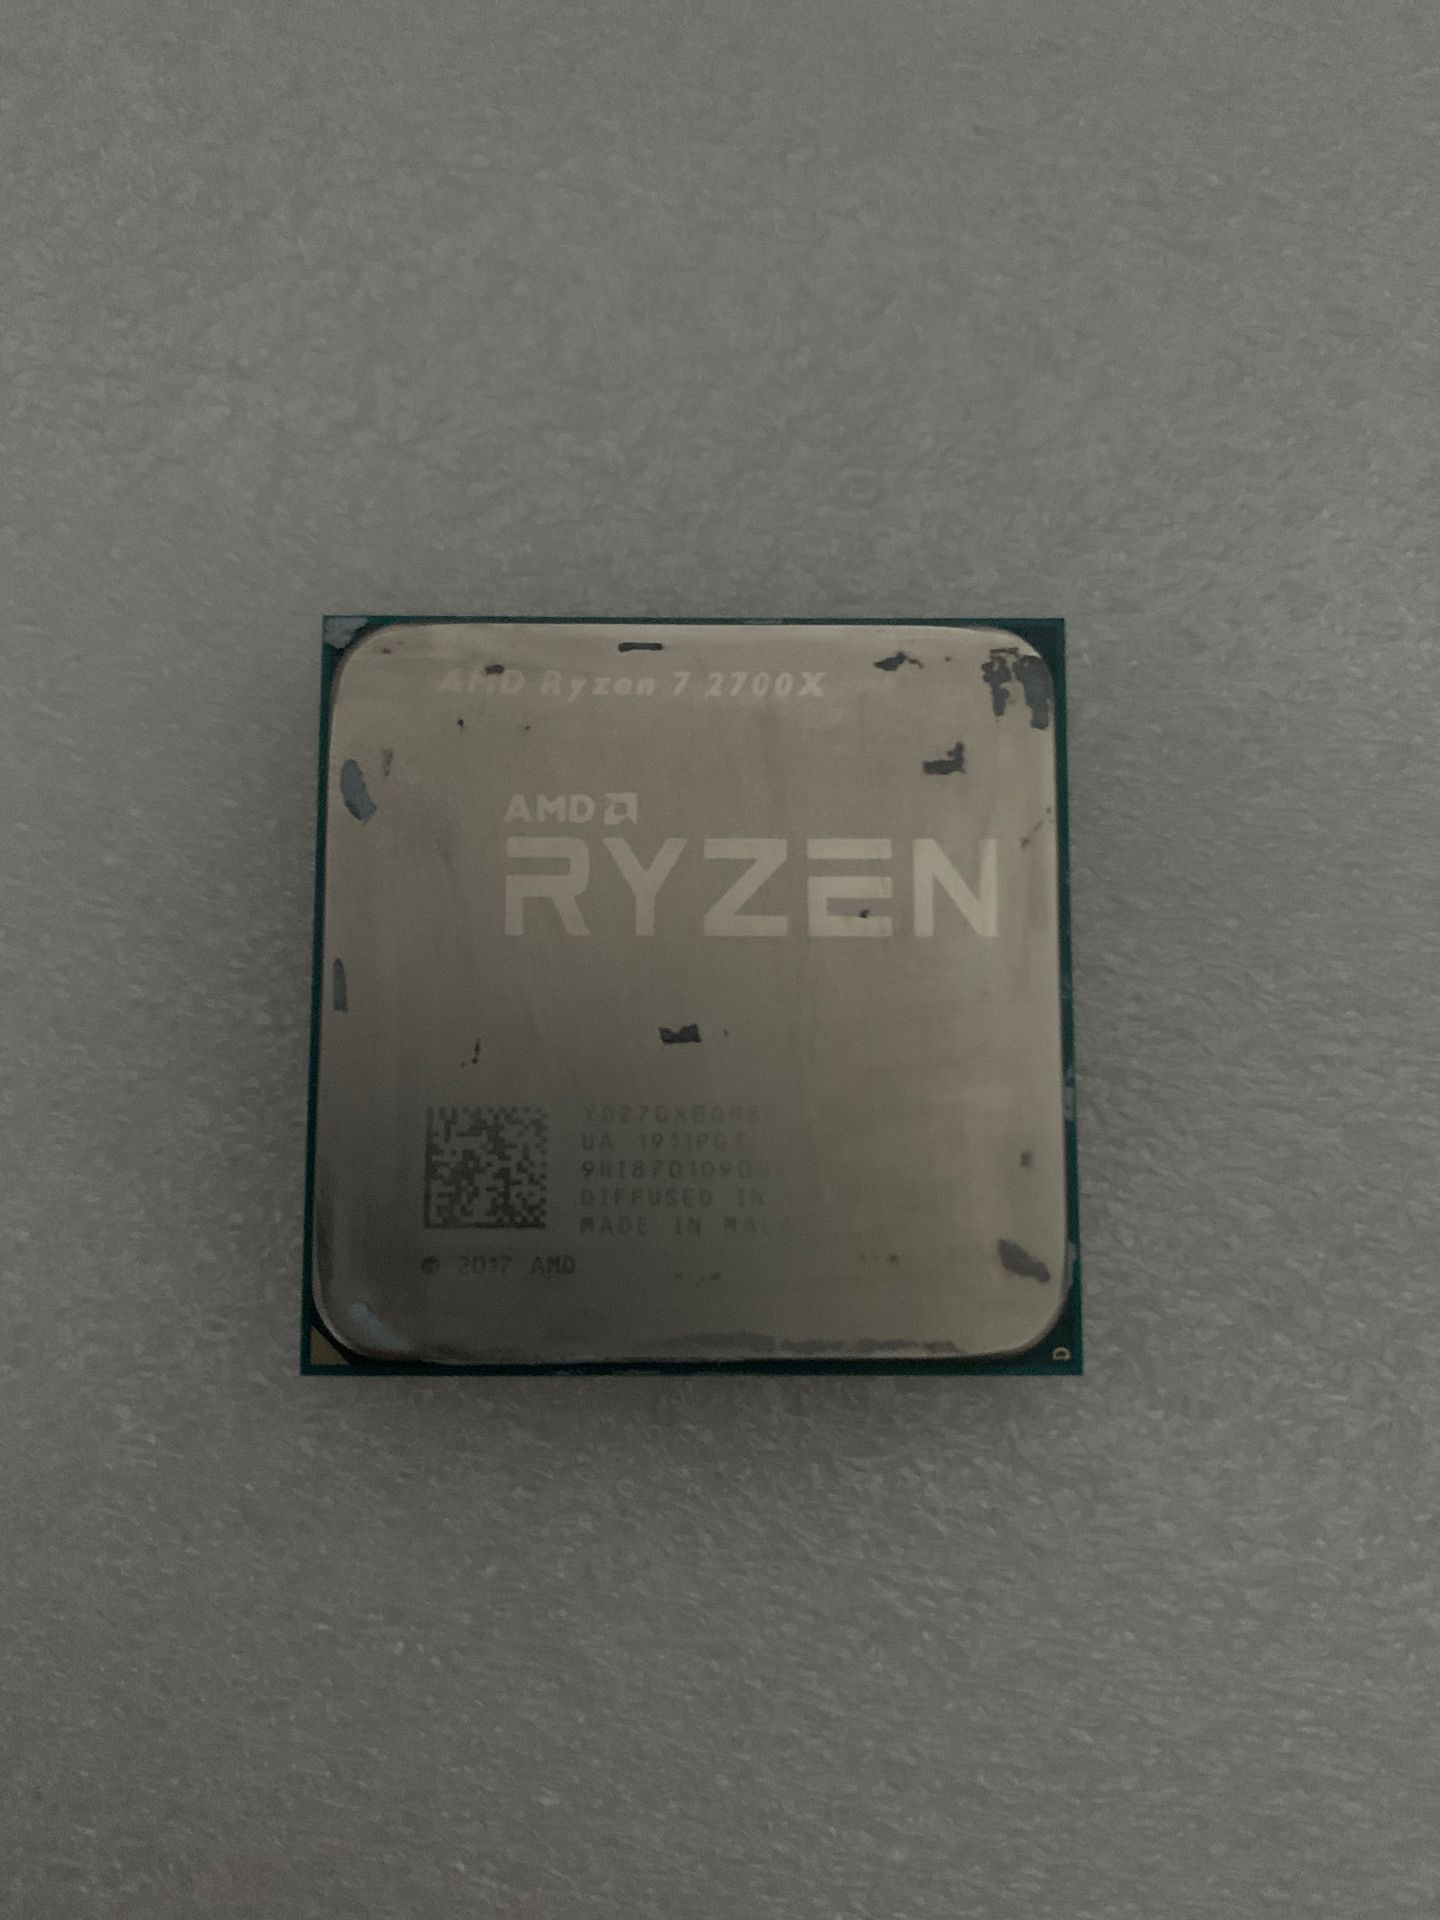 Ryzen 7 2700x (sold out everywhere)